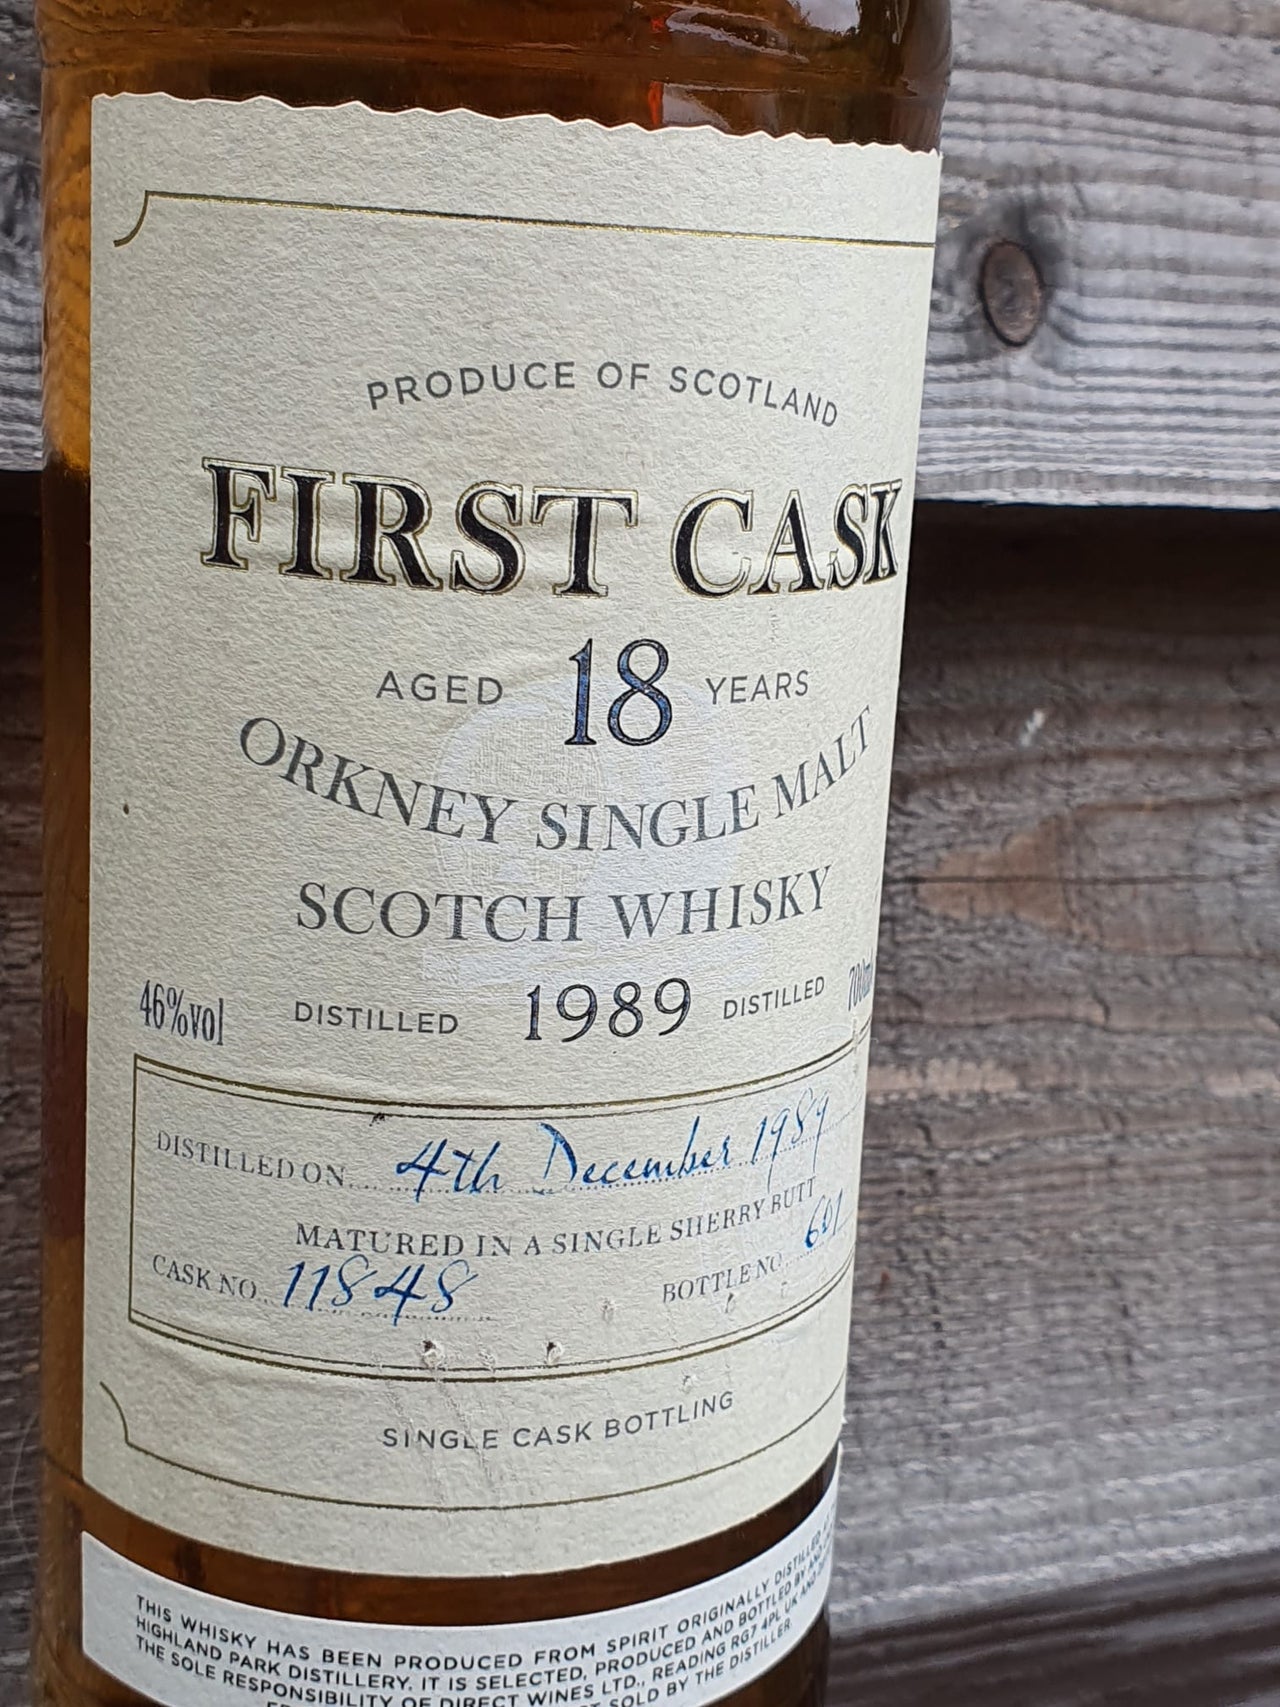 Private Collection First Cask 18 year old Orkney Single Malt 1989 cask 11848 bottle no 601 70cl 46%